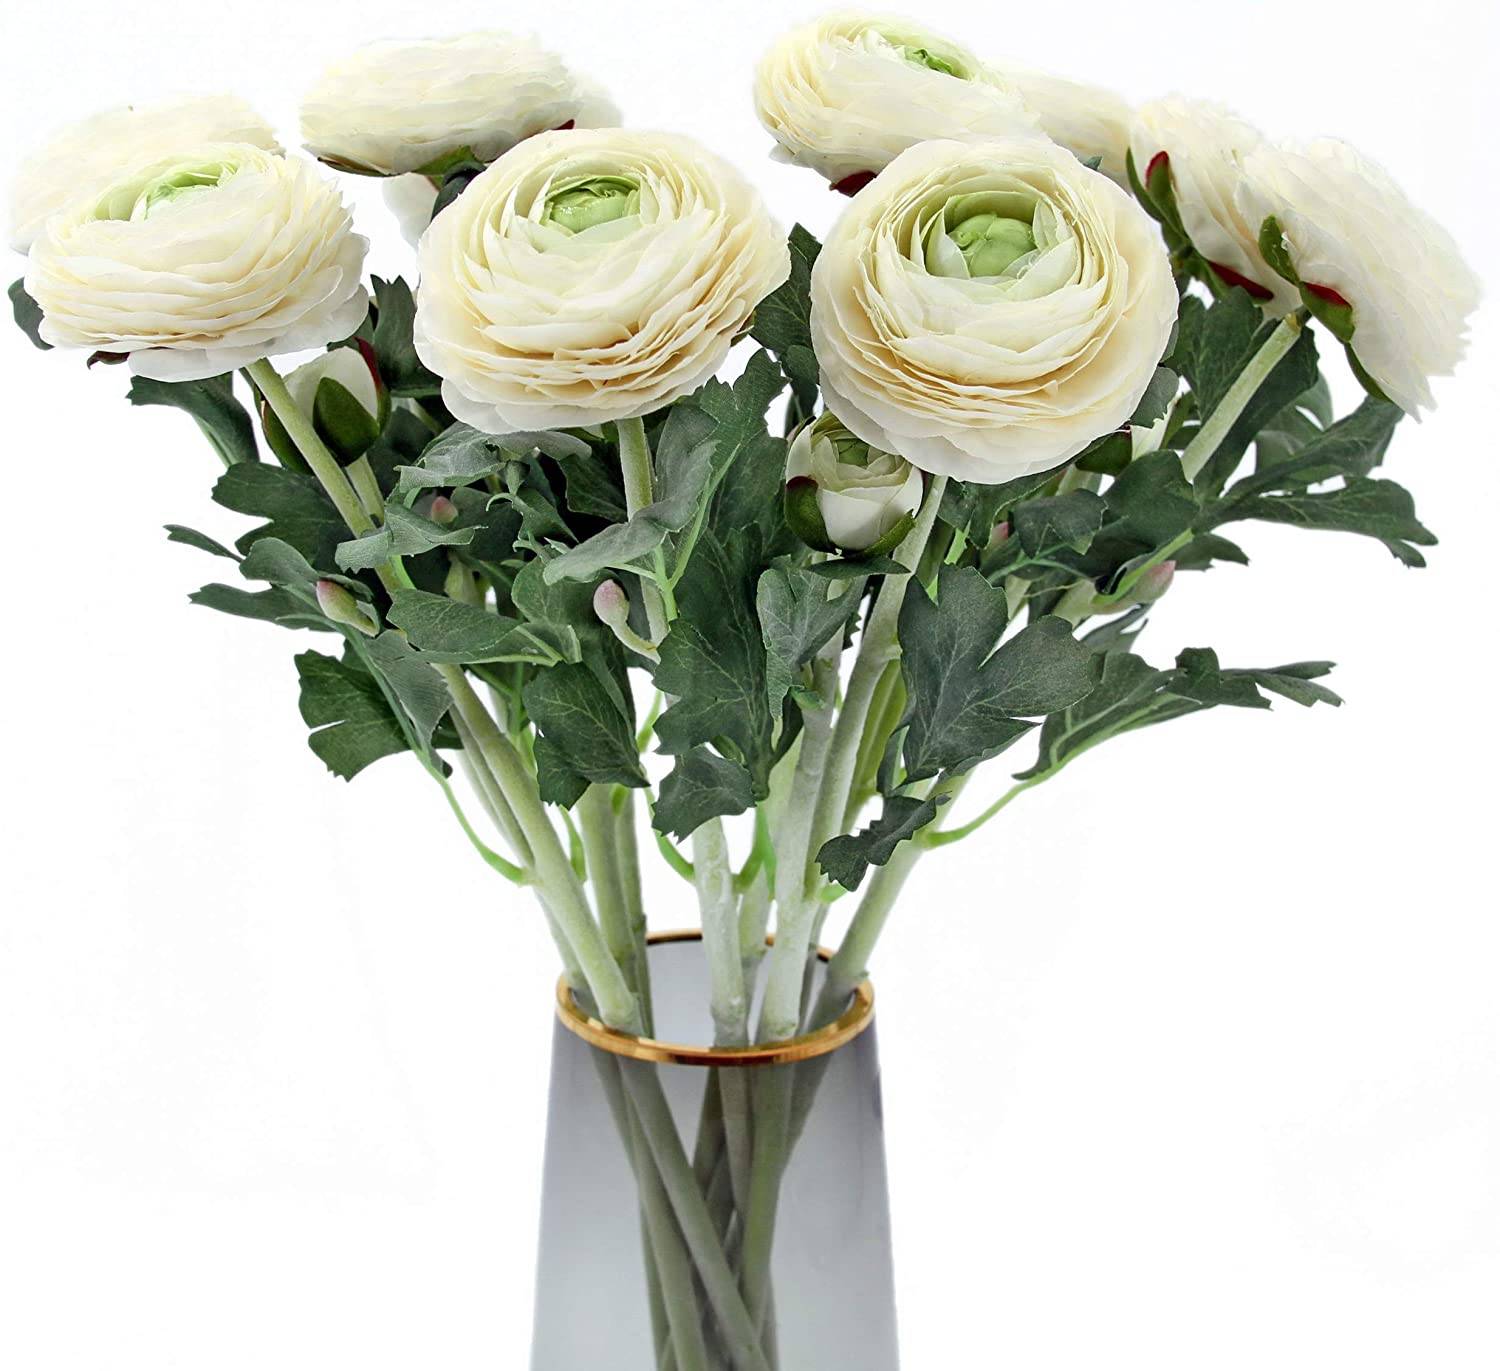 Wholesale High Quality Artificial Rose Flower for Wedding Decorations and Valentine’s Day Featured Image